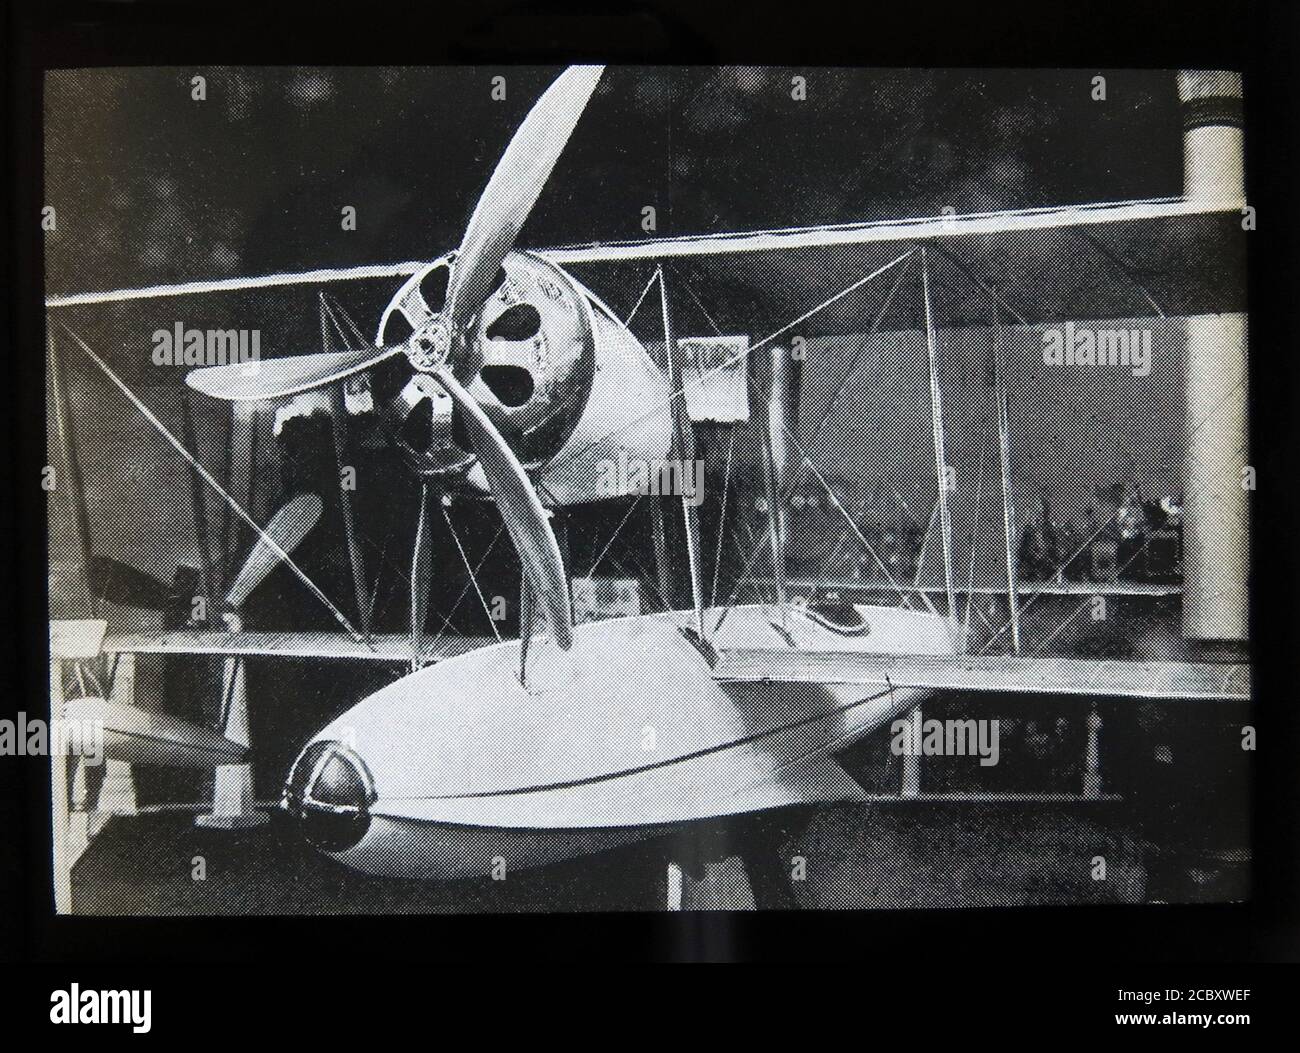 A magic lantern slide depicting the Pemberton-Billing P.B.1 flying boat, exhibited at the Olympia Aero Show in March 1914. The P.B.1, sometimes known as the 'Supermarine', was a British single-seat flying-boat built by Pemberton-Billing Limited, which later became the Supermarine Aviation Works. Only one example was built. Slide published by W. Butcher & Sons, London and dating from around 1914. Stock Photo